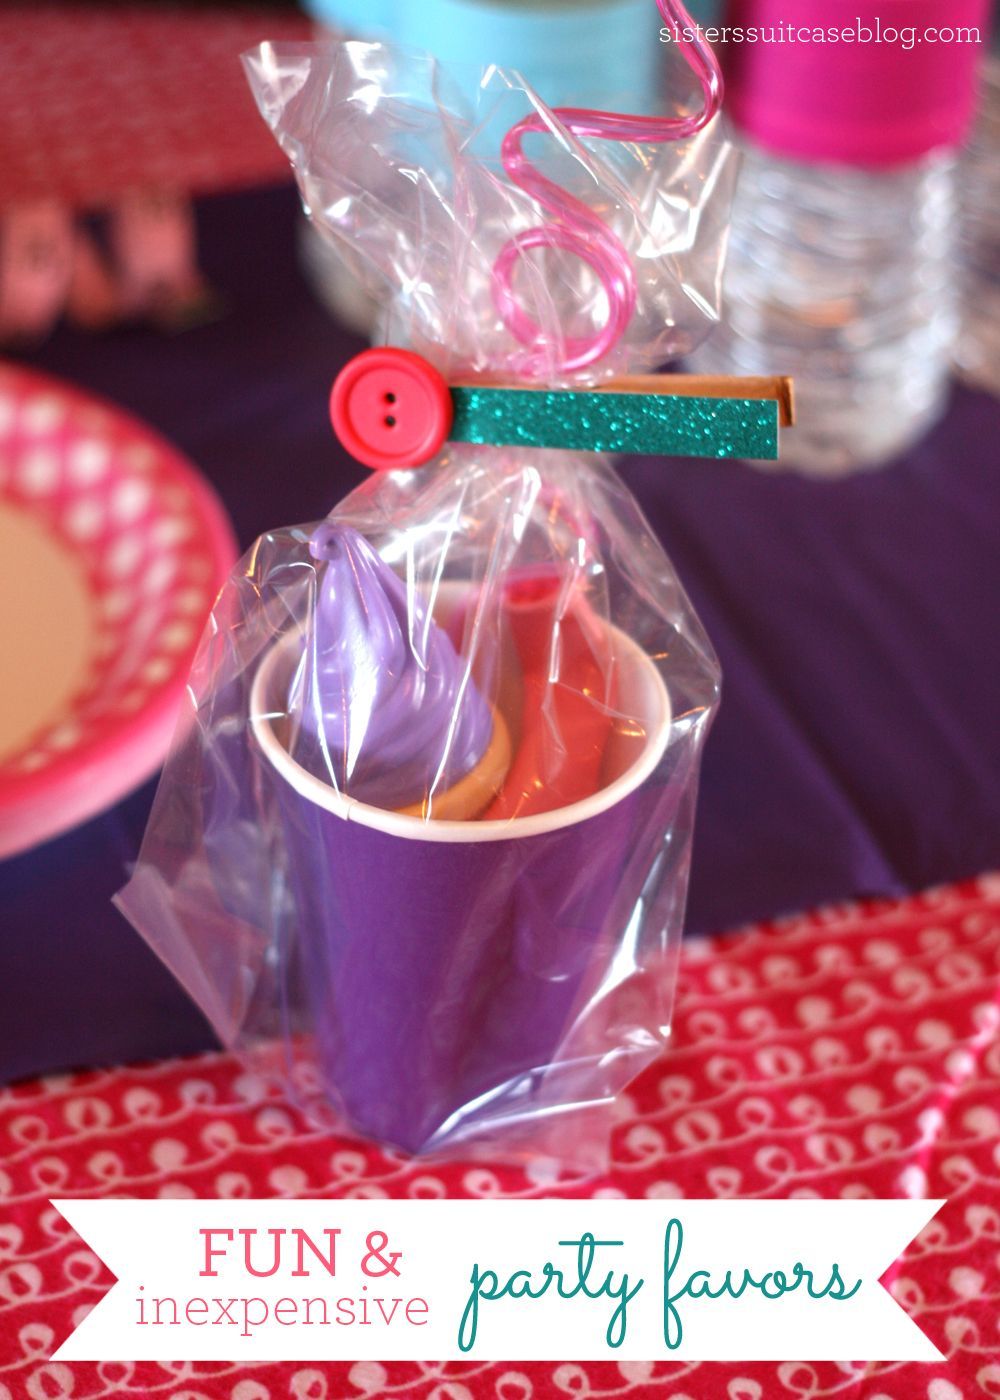 Party Favors – Each favor included: ice cream cone bubbles (3 for $1), a Loopy s